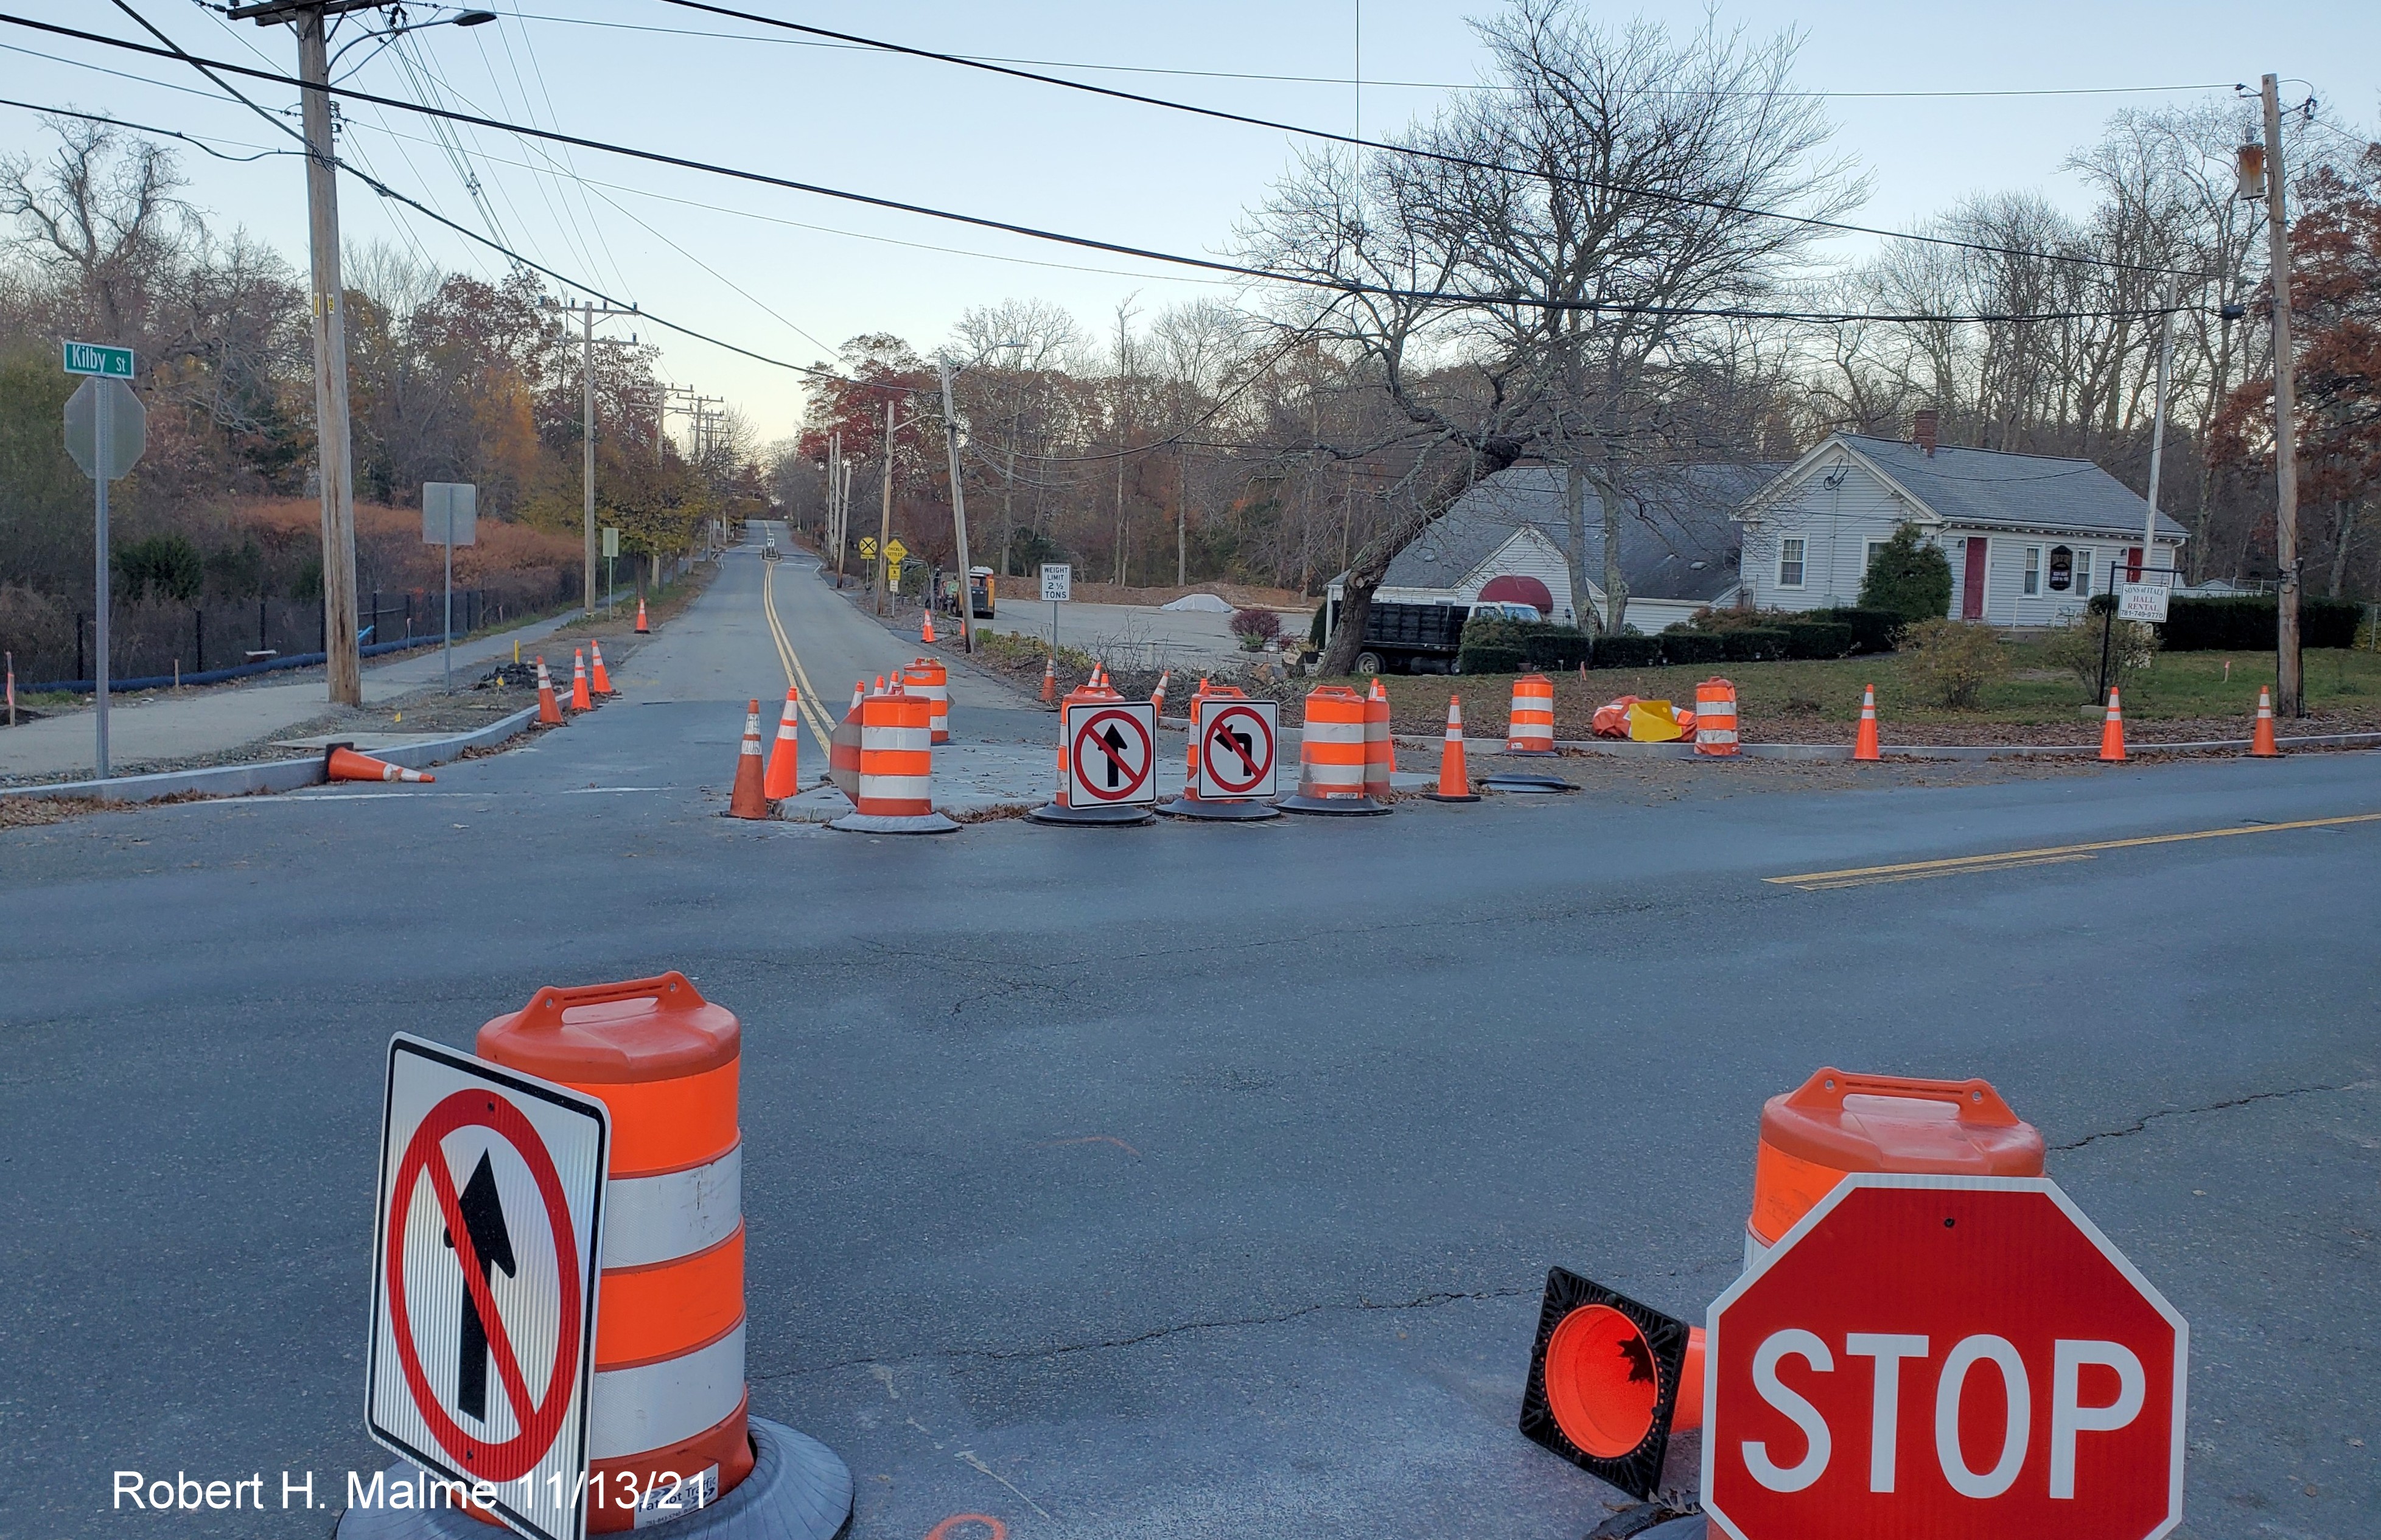 Image of temporary no turn signs at intersection of Kilby Street and Chief Justice Cushing Highway North (MA 3A) in Hingham, November 2021